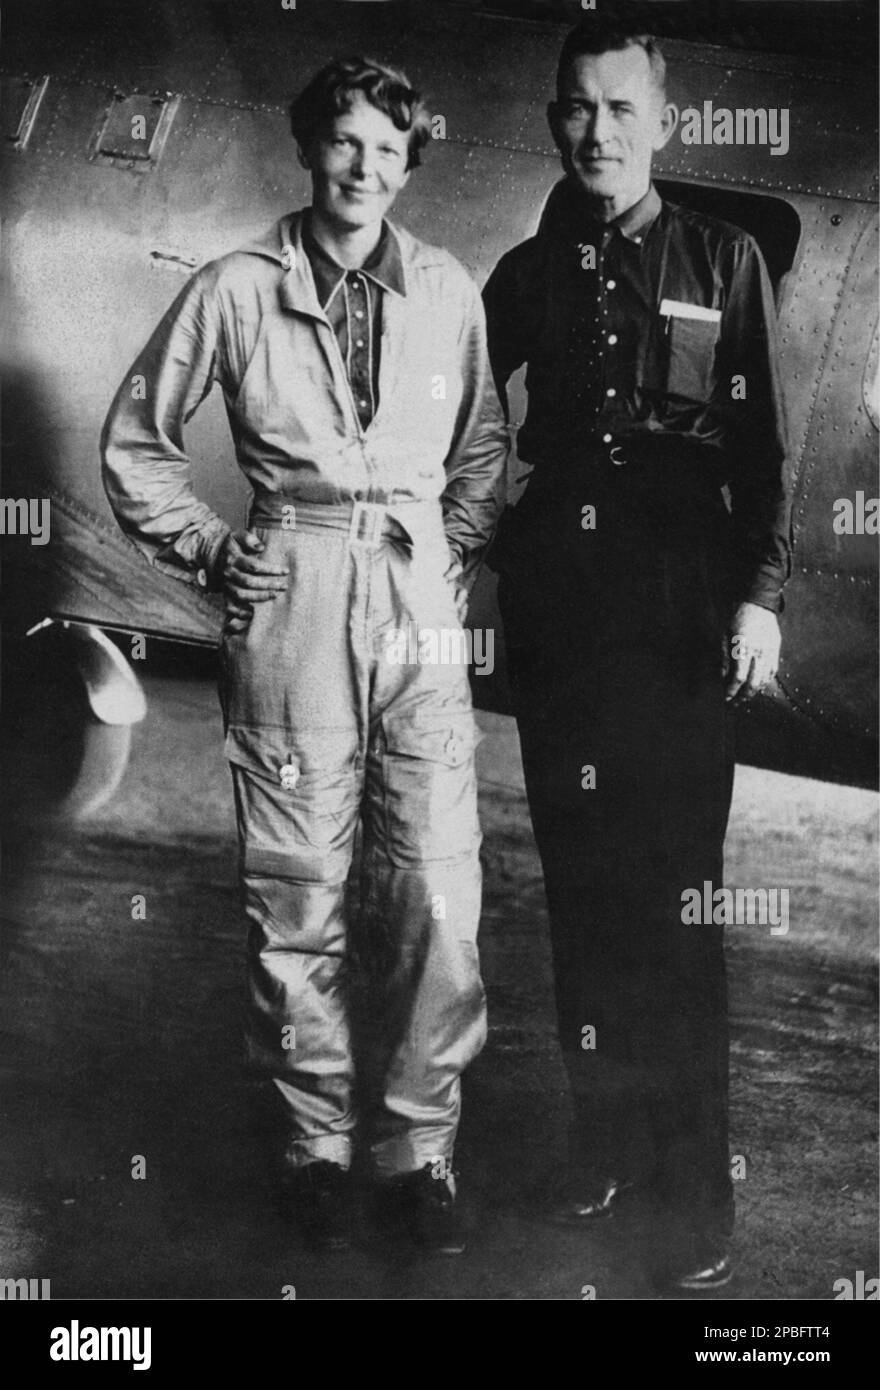 1937, USA  :  Portraits of  most celebrated woman aviator AMELIA EARHART ( 1897 - 1937 ) and her navigator FRED NOONAN , took off on a round-the-world flight that may have ended on Nikumaroro 's freef flat . Earhart was the first woman to receive the Distinguished Flying Cross which she was awarded as the first aviatrix to fly solo across the Atlantic Ocean.  She set many other records, wrote best-selling books about her flying experiences, and was instrumental in the formation of The Ninety-Nines, an organization for female pilots.  During an attempt to make a circumnavigational flight of the Stock Photo